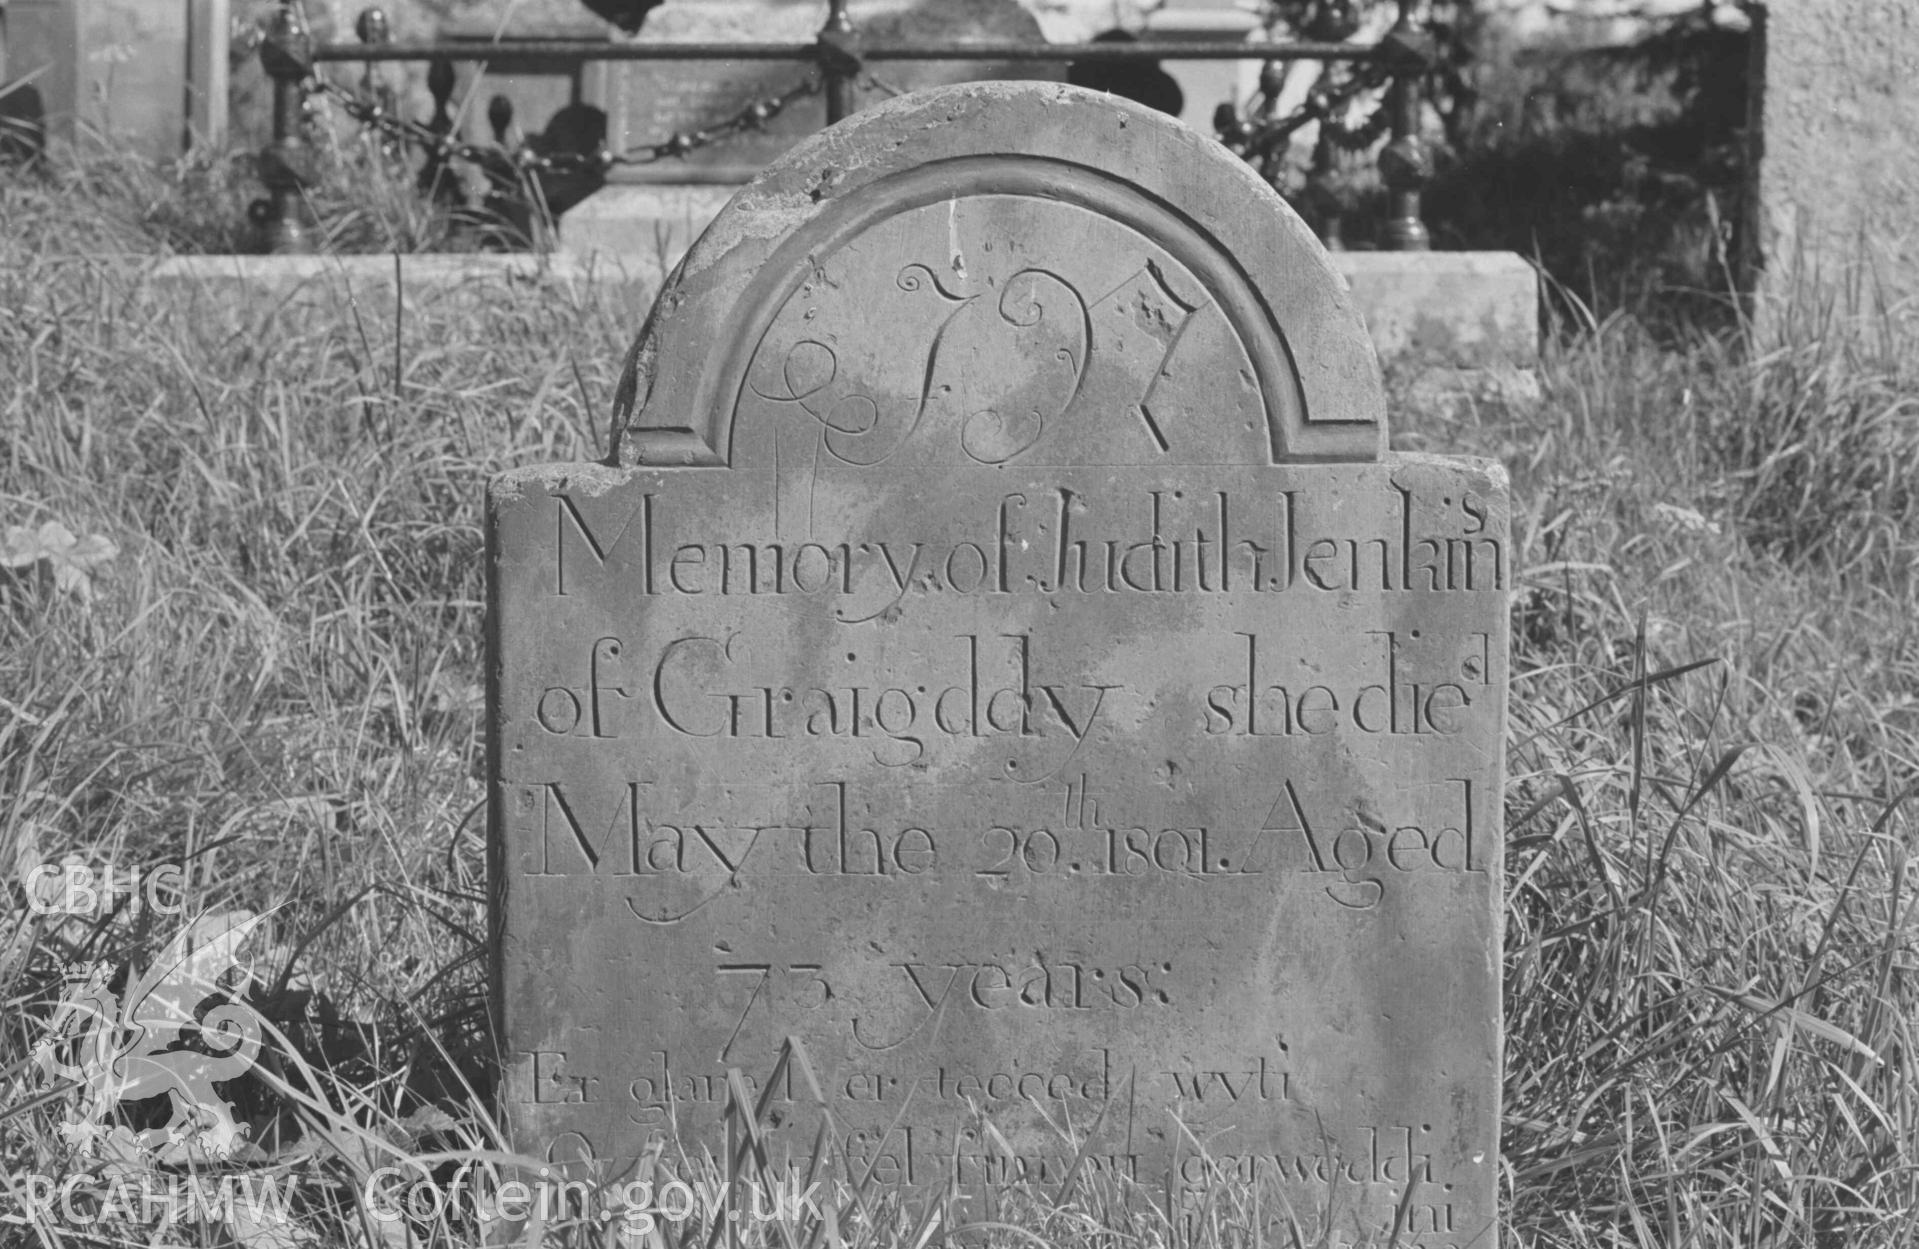 Digital copy of a black and white negative showing tombstones in the churchyard at Llanddewi-Brefi. Photographed by Arthur Chater on 22 August 1968. Grid Reference SN 664 553.